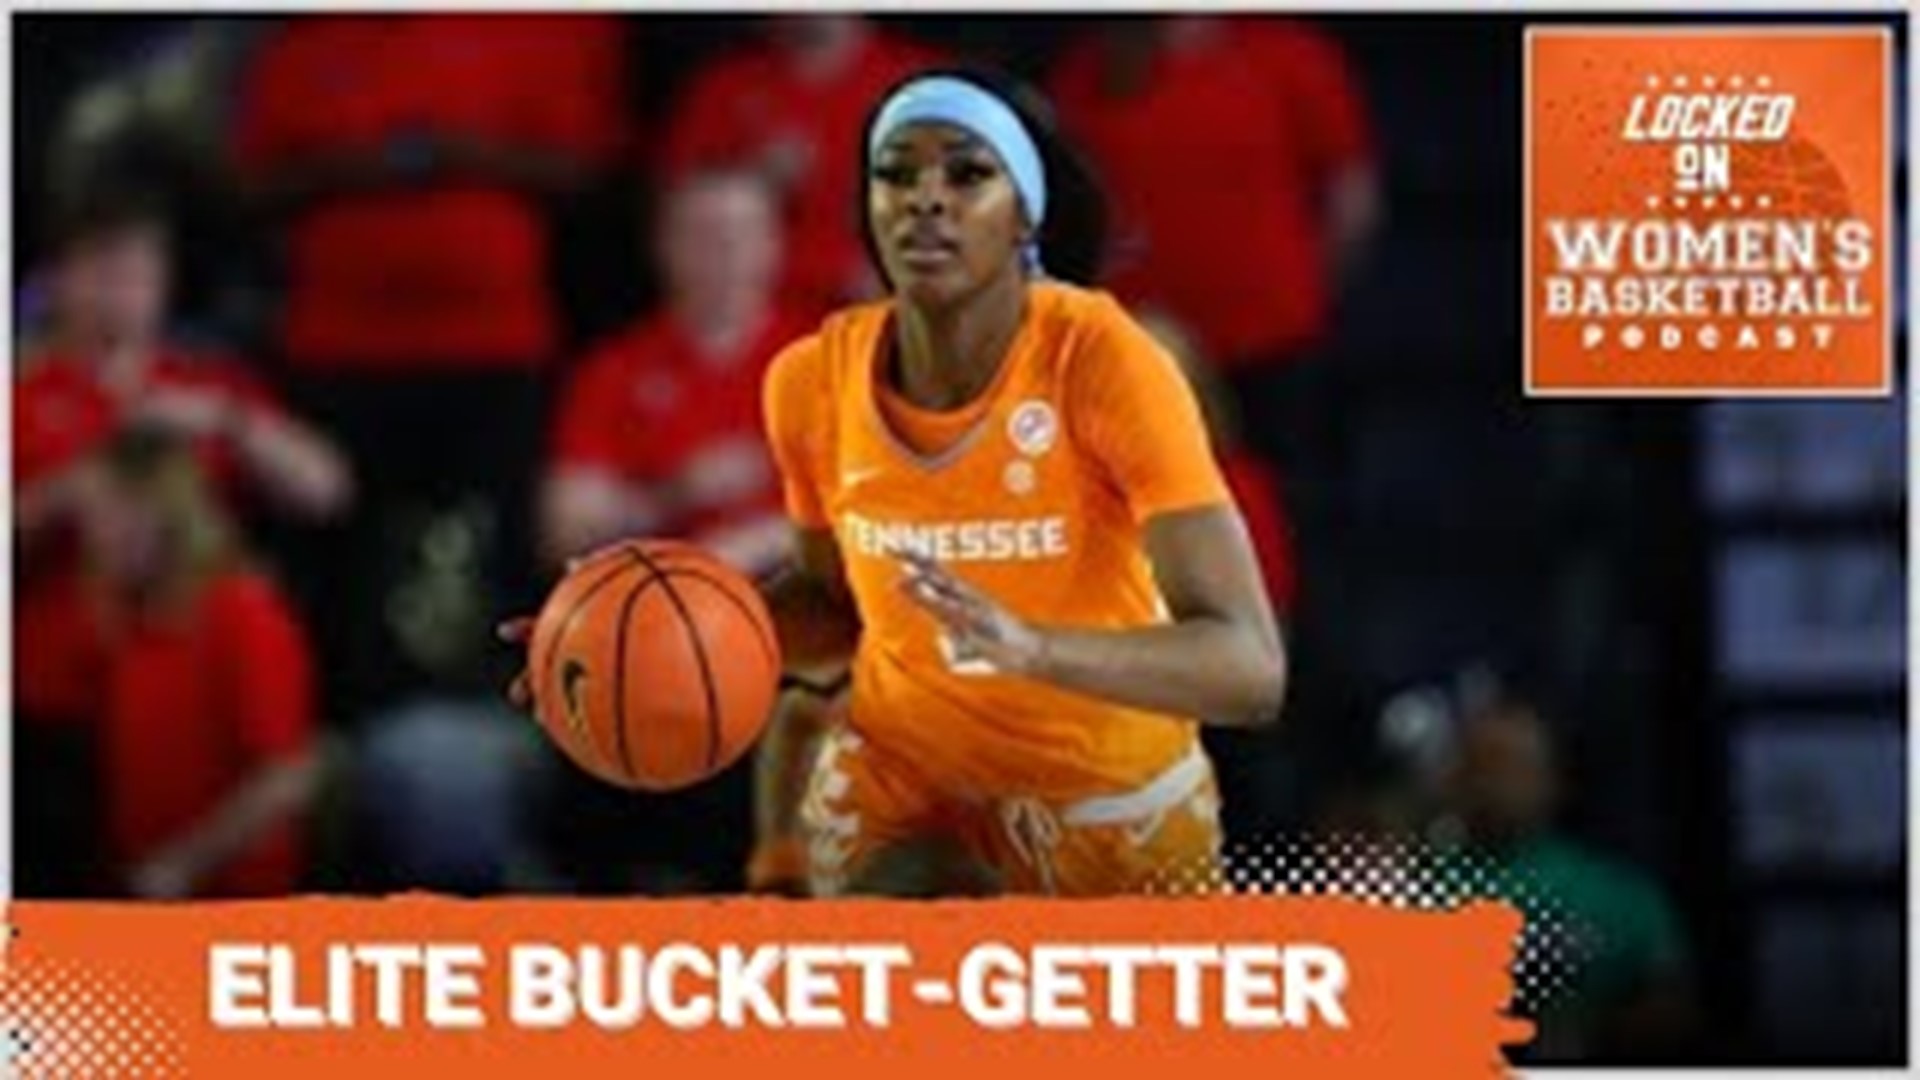 Host Hunter Cruse is joined by co-hosts Em Adler and Lincoln Shafer for a scouting report on Tennessee forward Rickea Jackson.